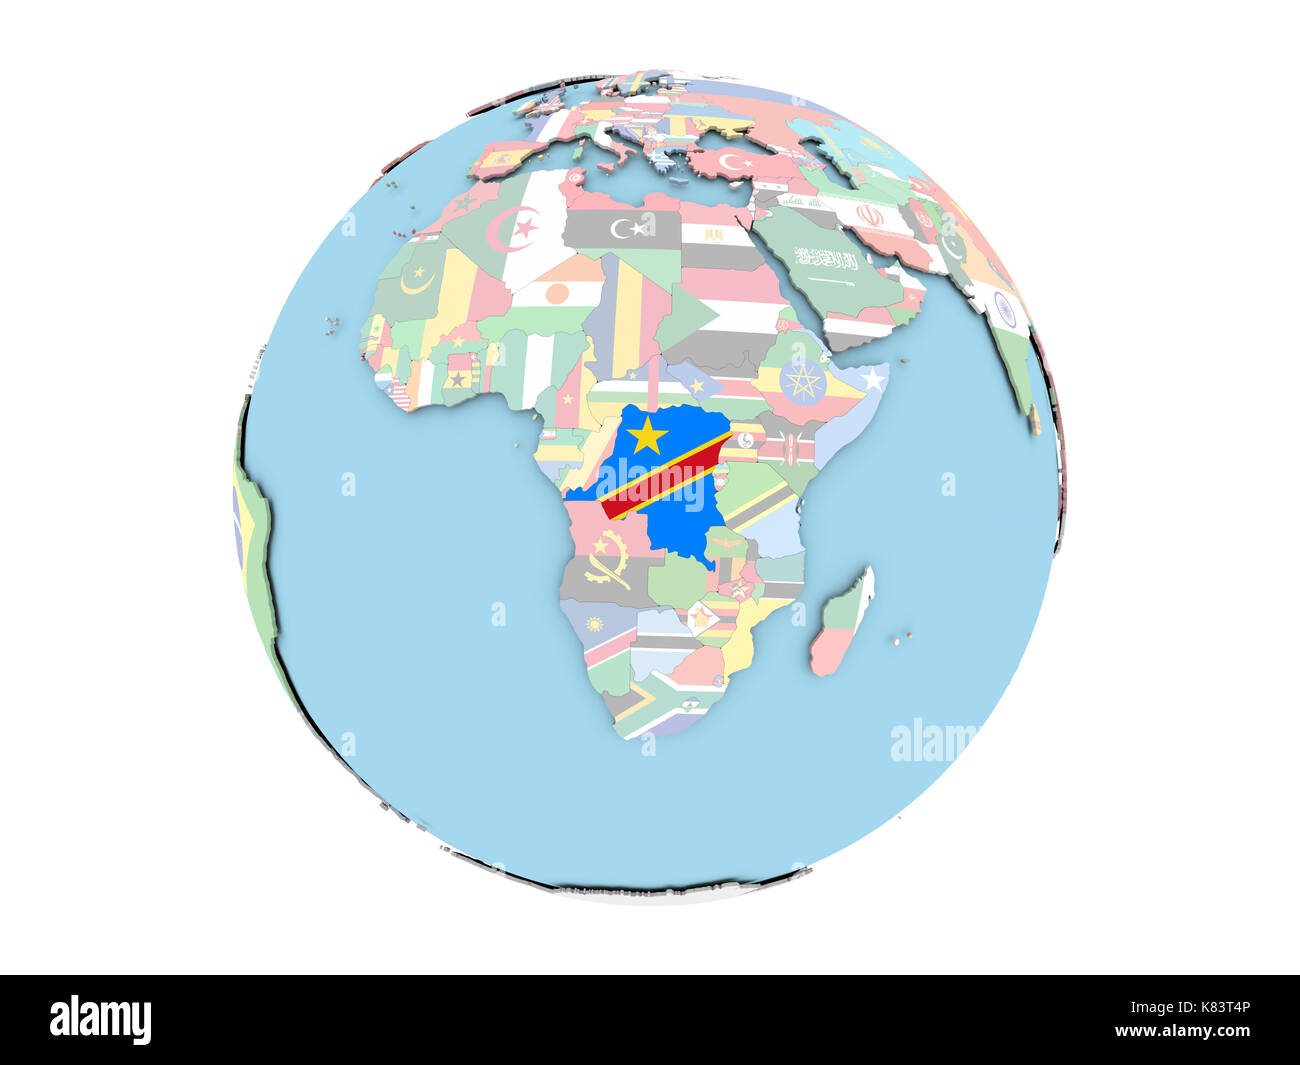 Democratic Republic of Congo on political globe with embedded flags. 3D illustration isolated on white background. Stock Photo